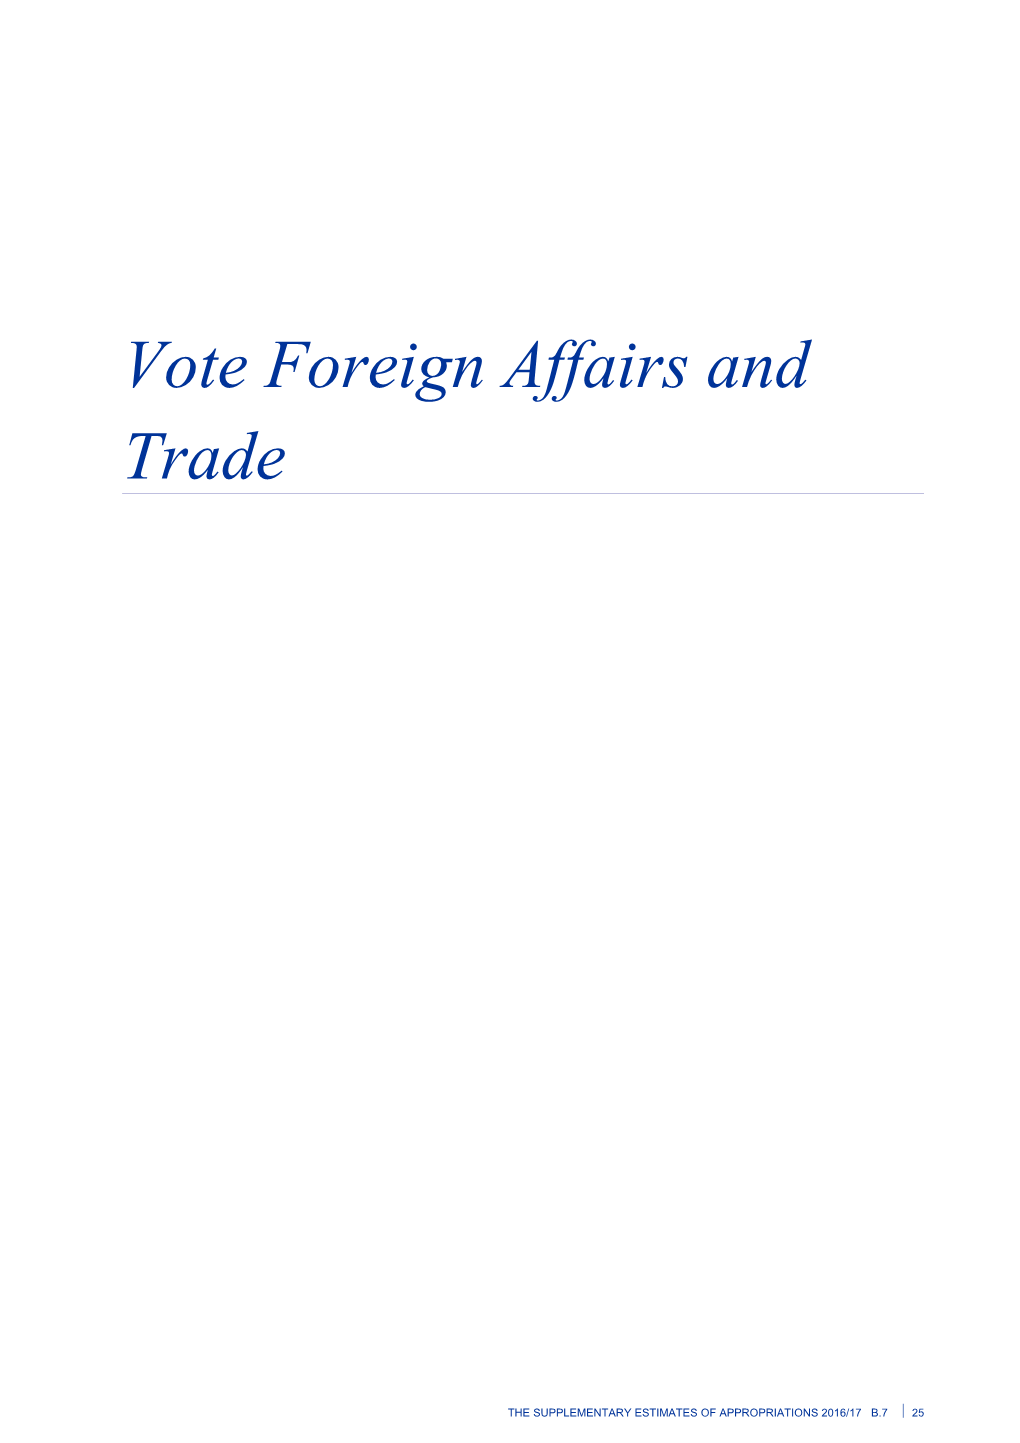 Vote Foreign Affairs and Trade - Supplementary Estimates of Appropriations 2016/17 - Budget 2017